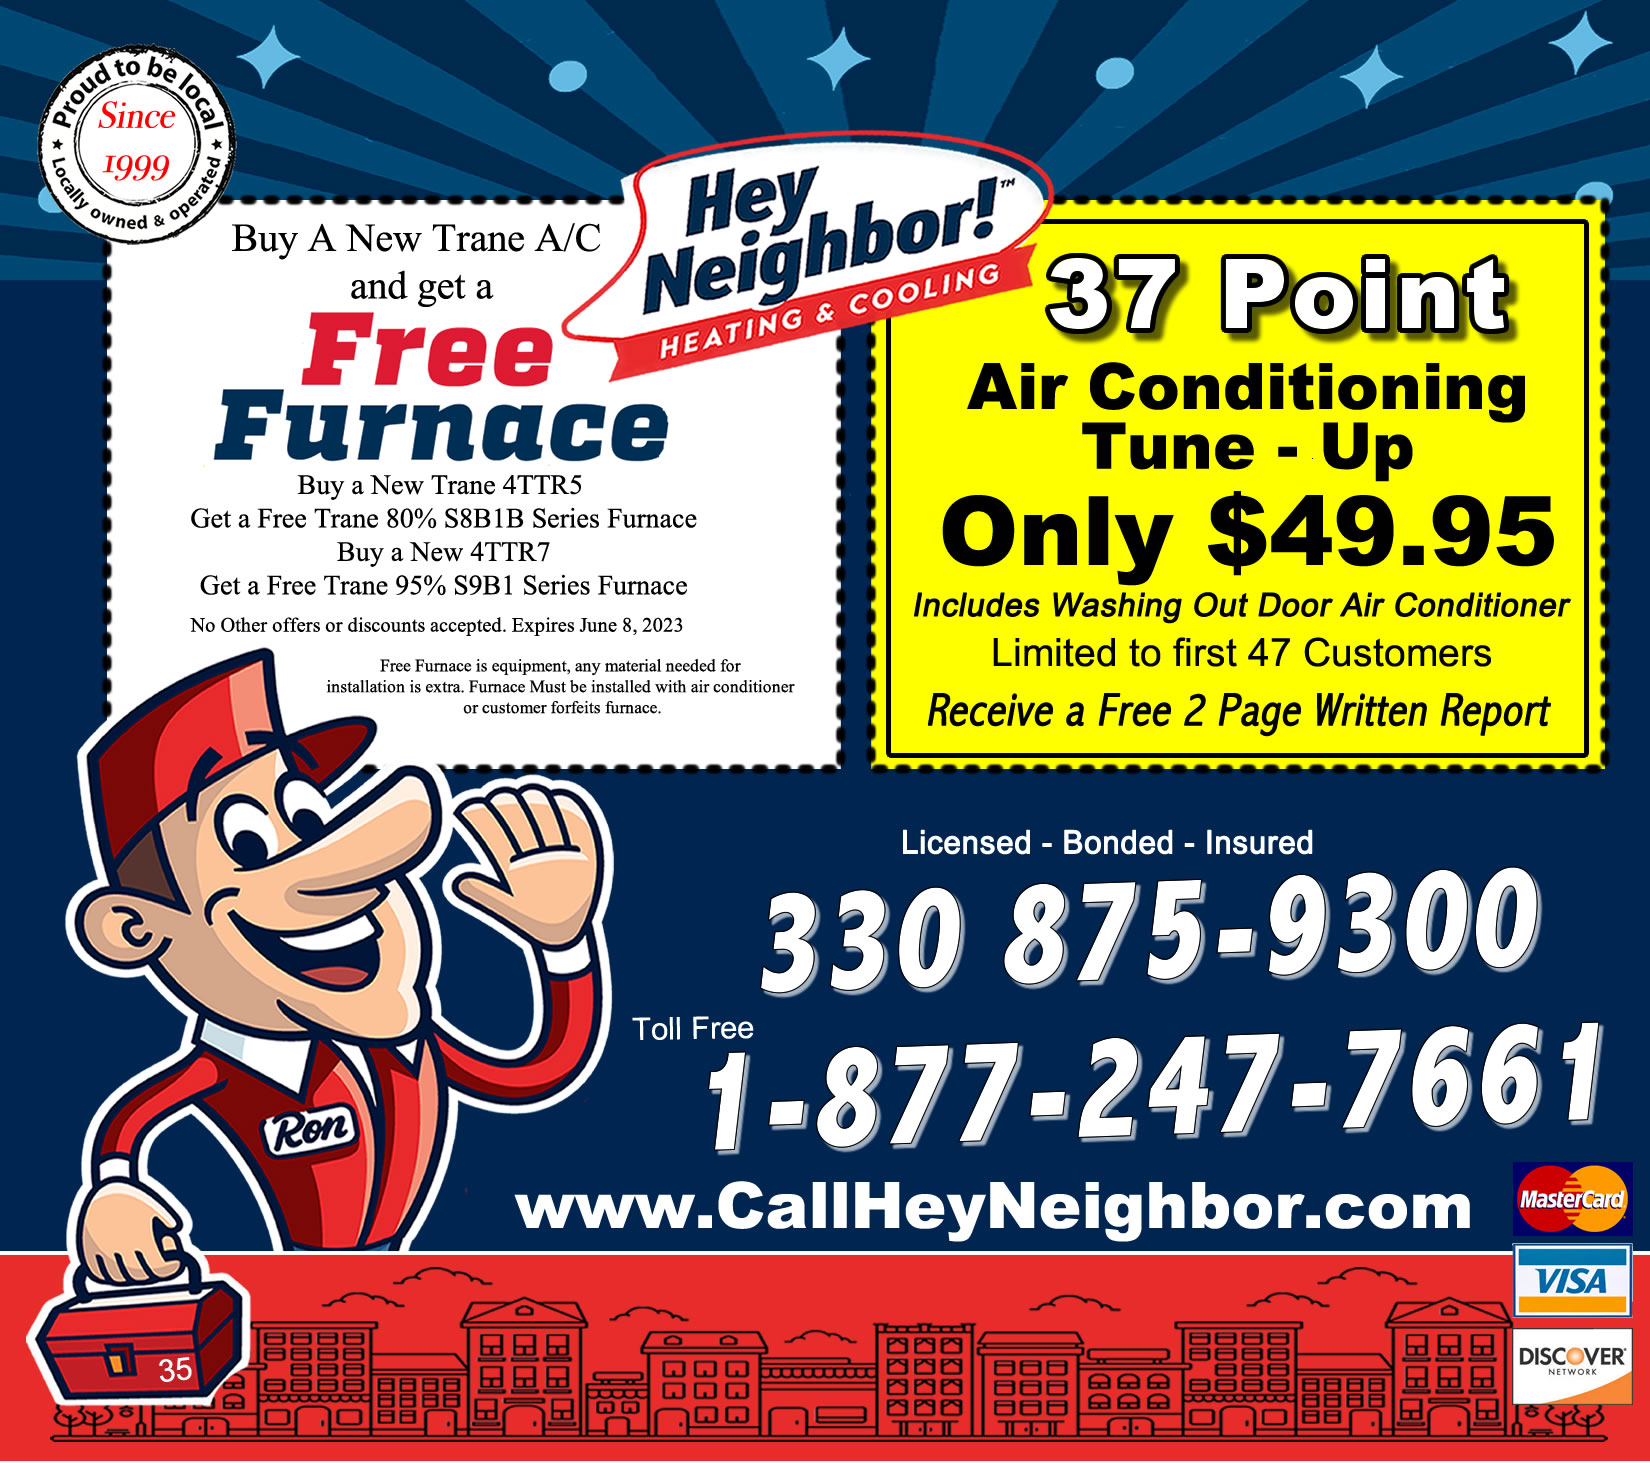 Buy a new Trane AC and get a free furnace -or- Get a 37-point air conditioning tune-up for only .95!